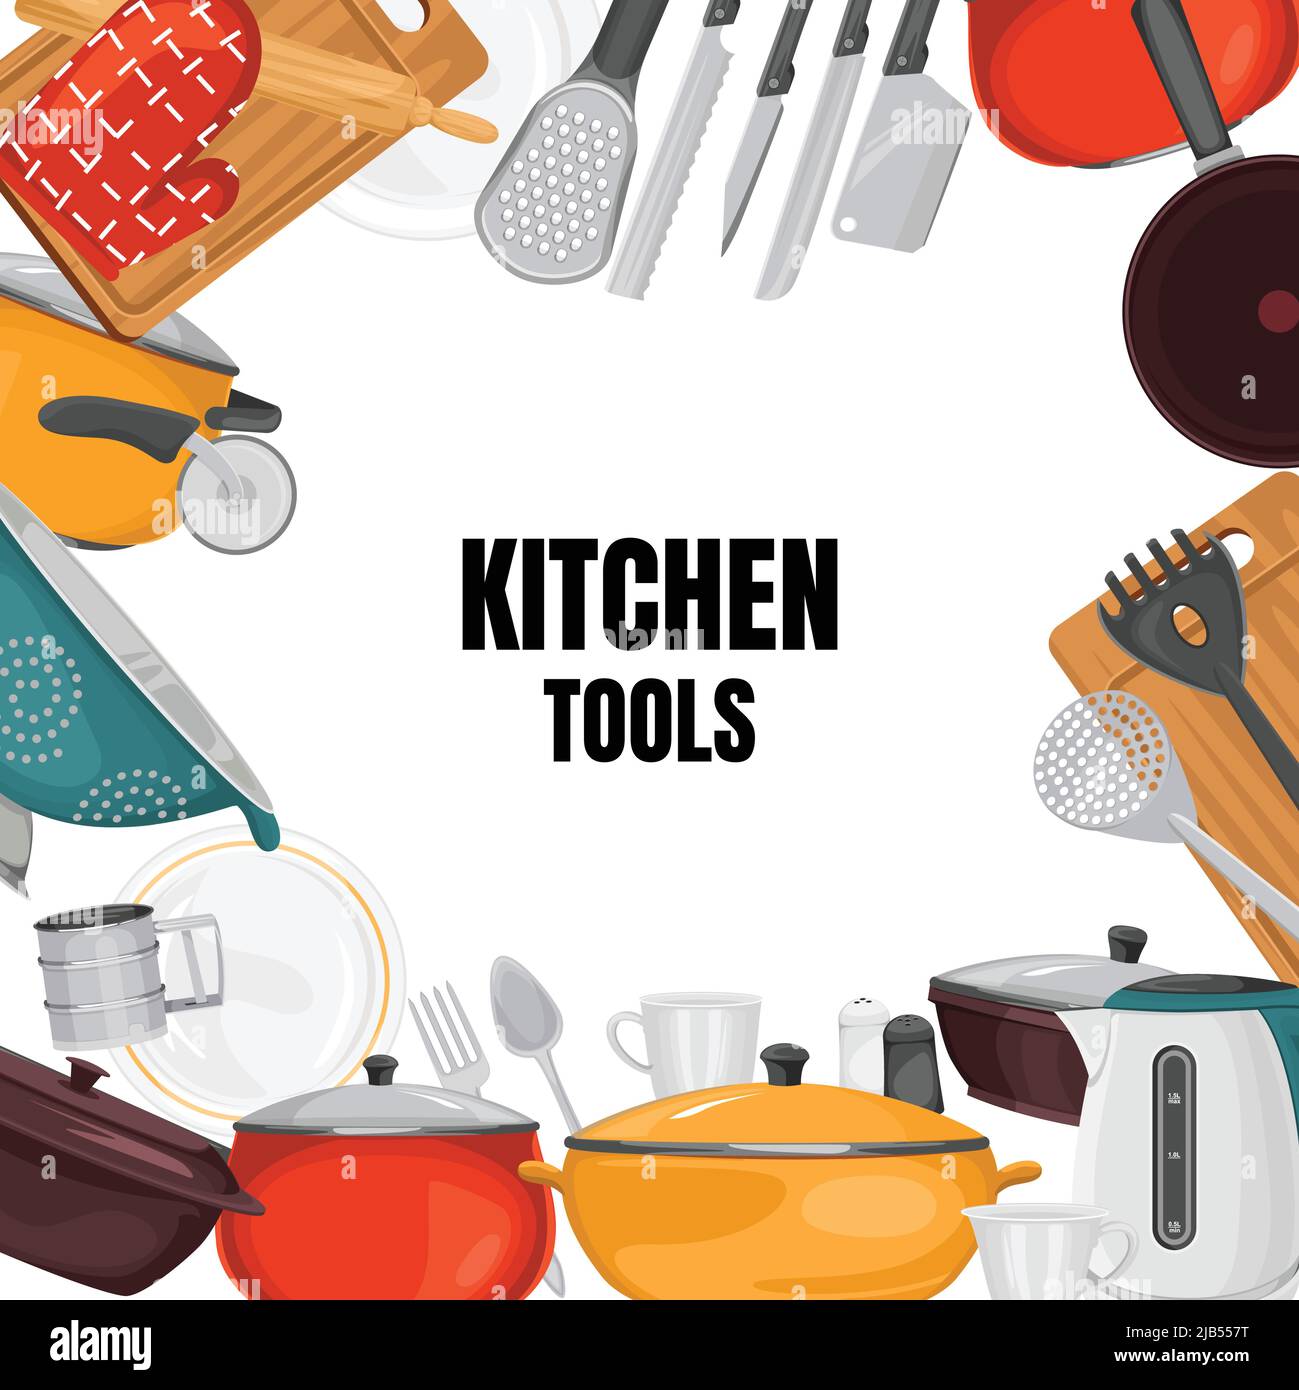 https://c8.alamy.com/comp/2JB557T/kitchen-frame-composition-with-editable-text-surrounded-by-images-of-cooking-utensils-pots-pans-and-cutlery-vector-illustration-2JB557T.jpg